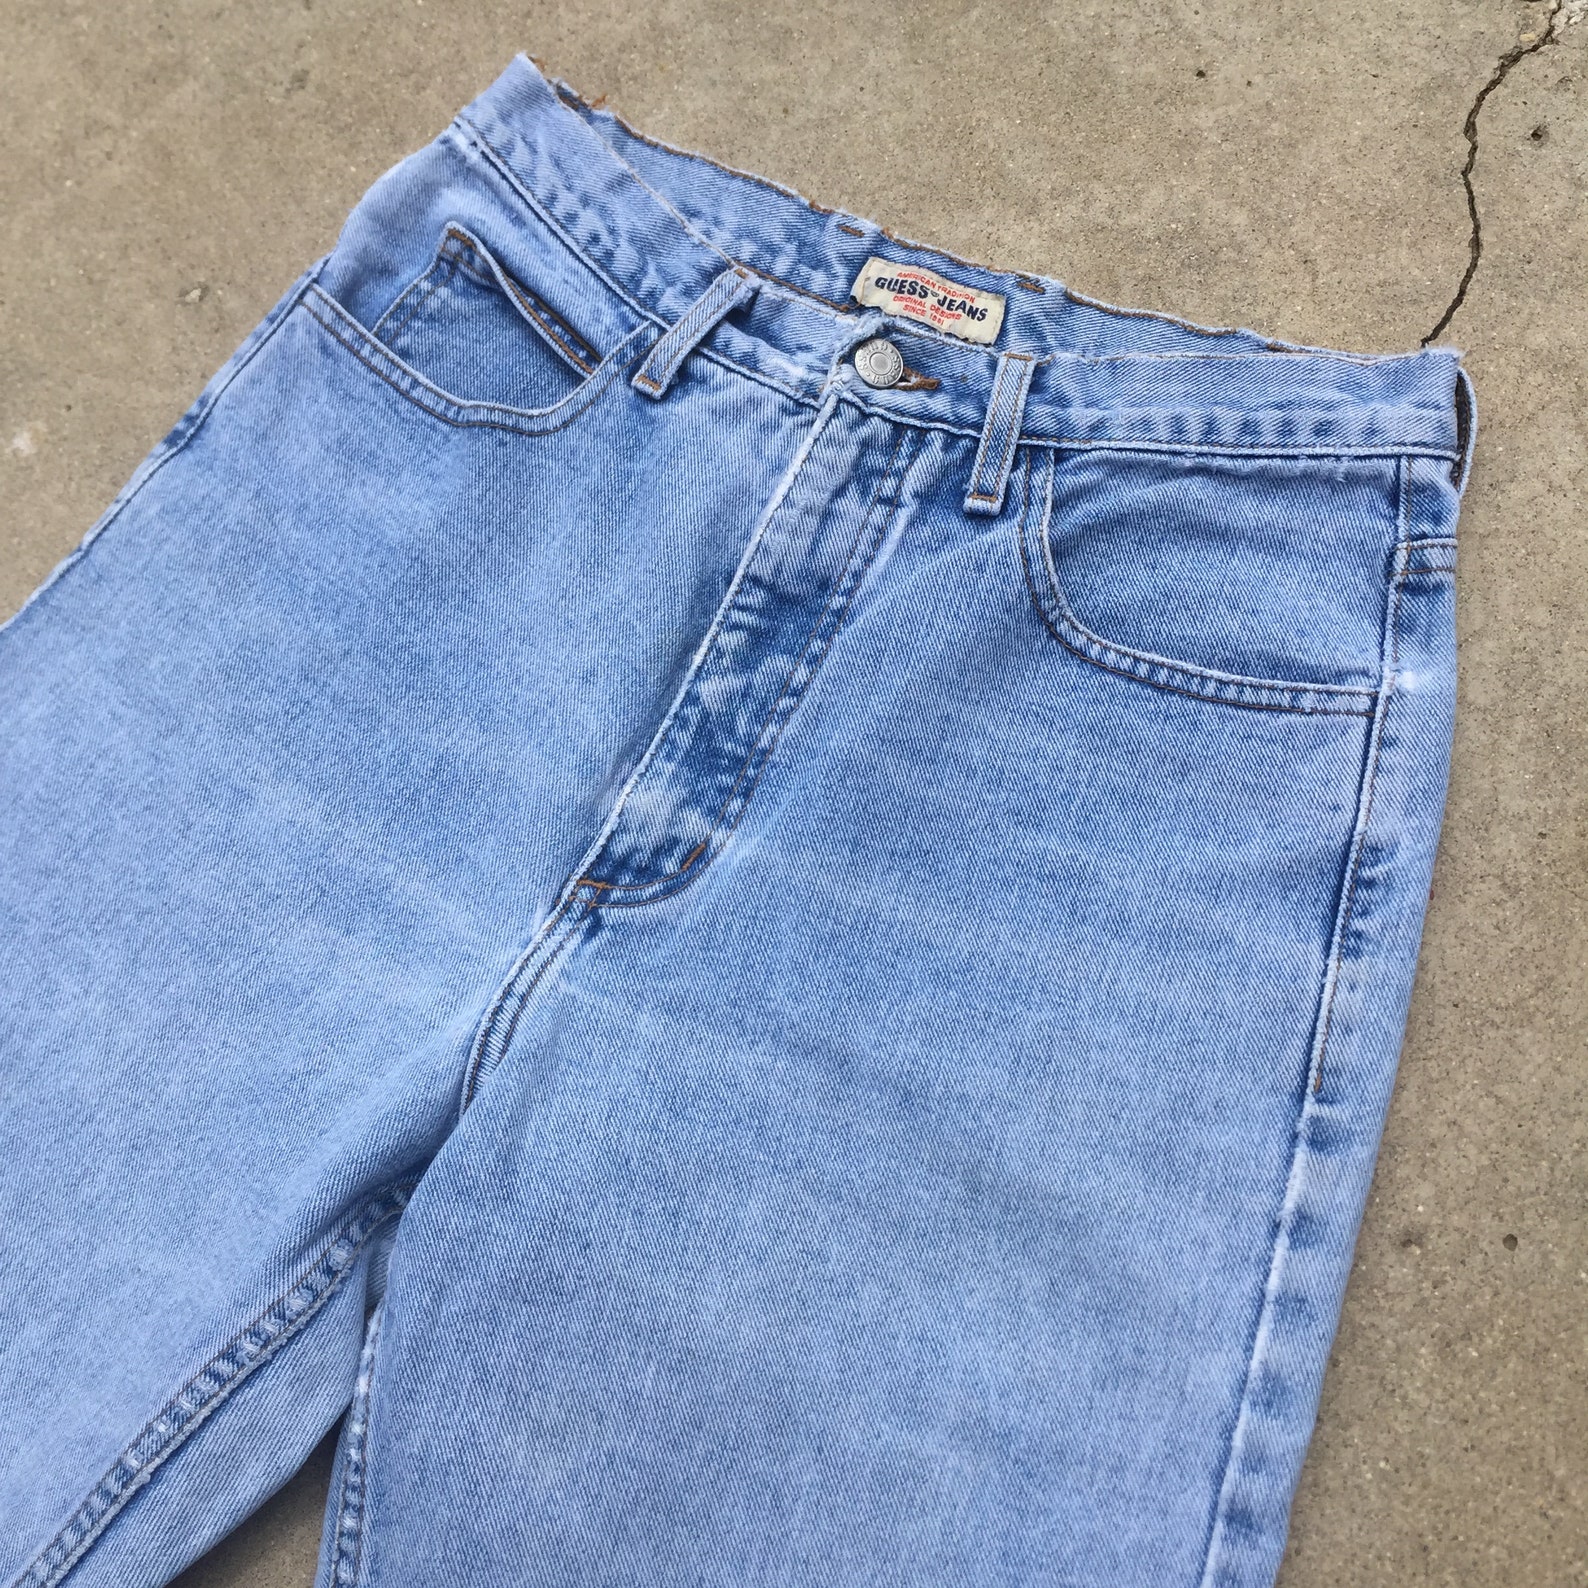 90s Guess Jeans // vintage guess jeans//womens guess | Etsy